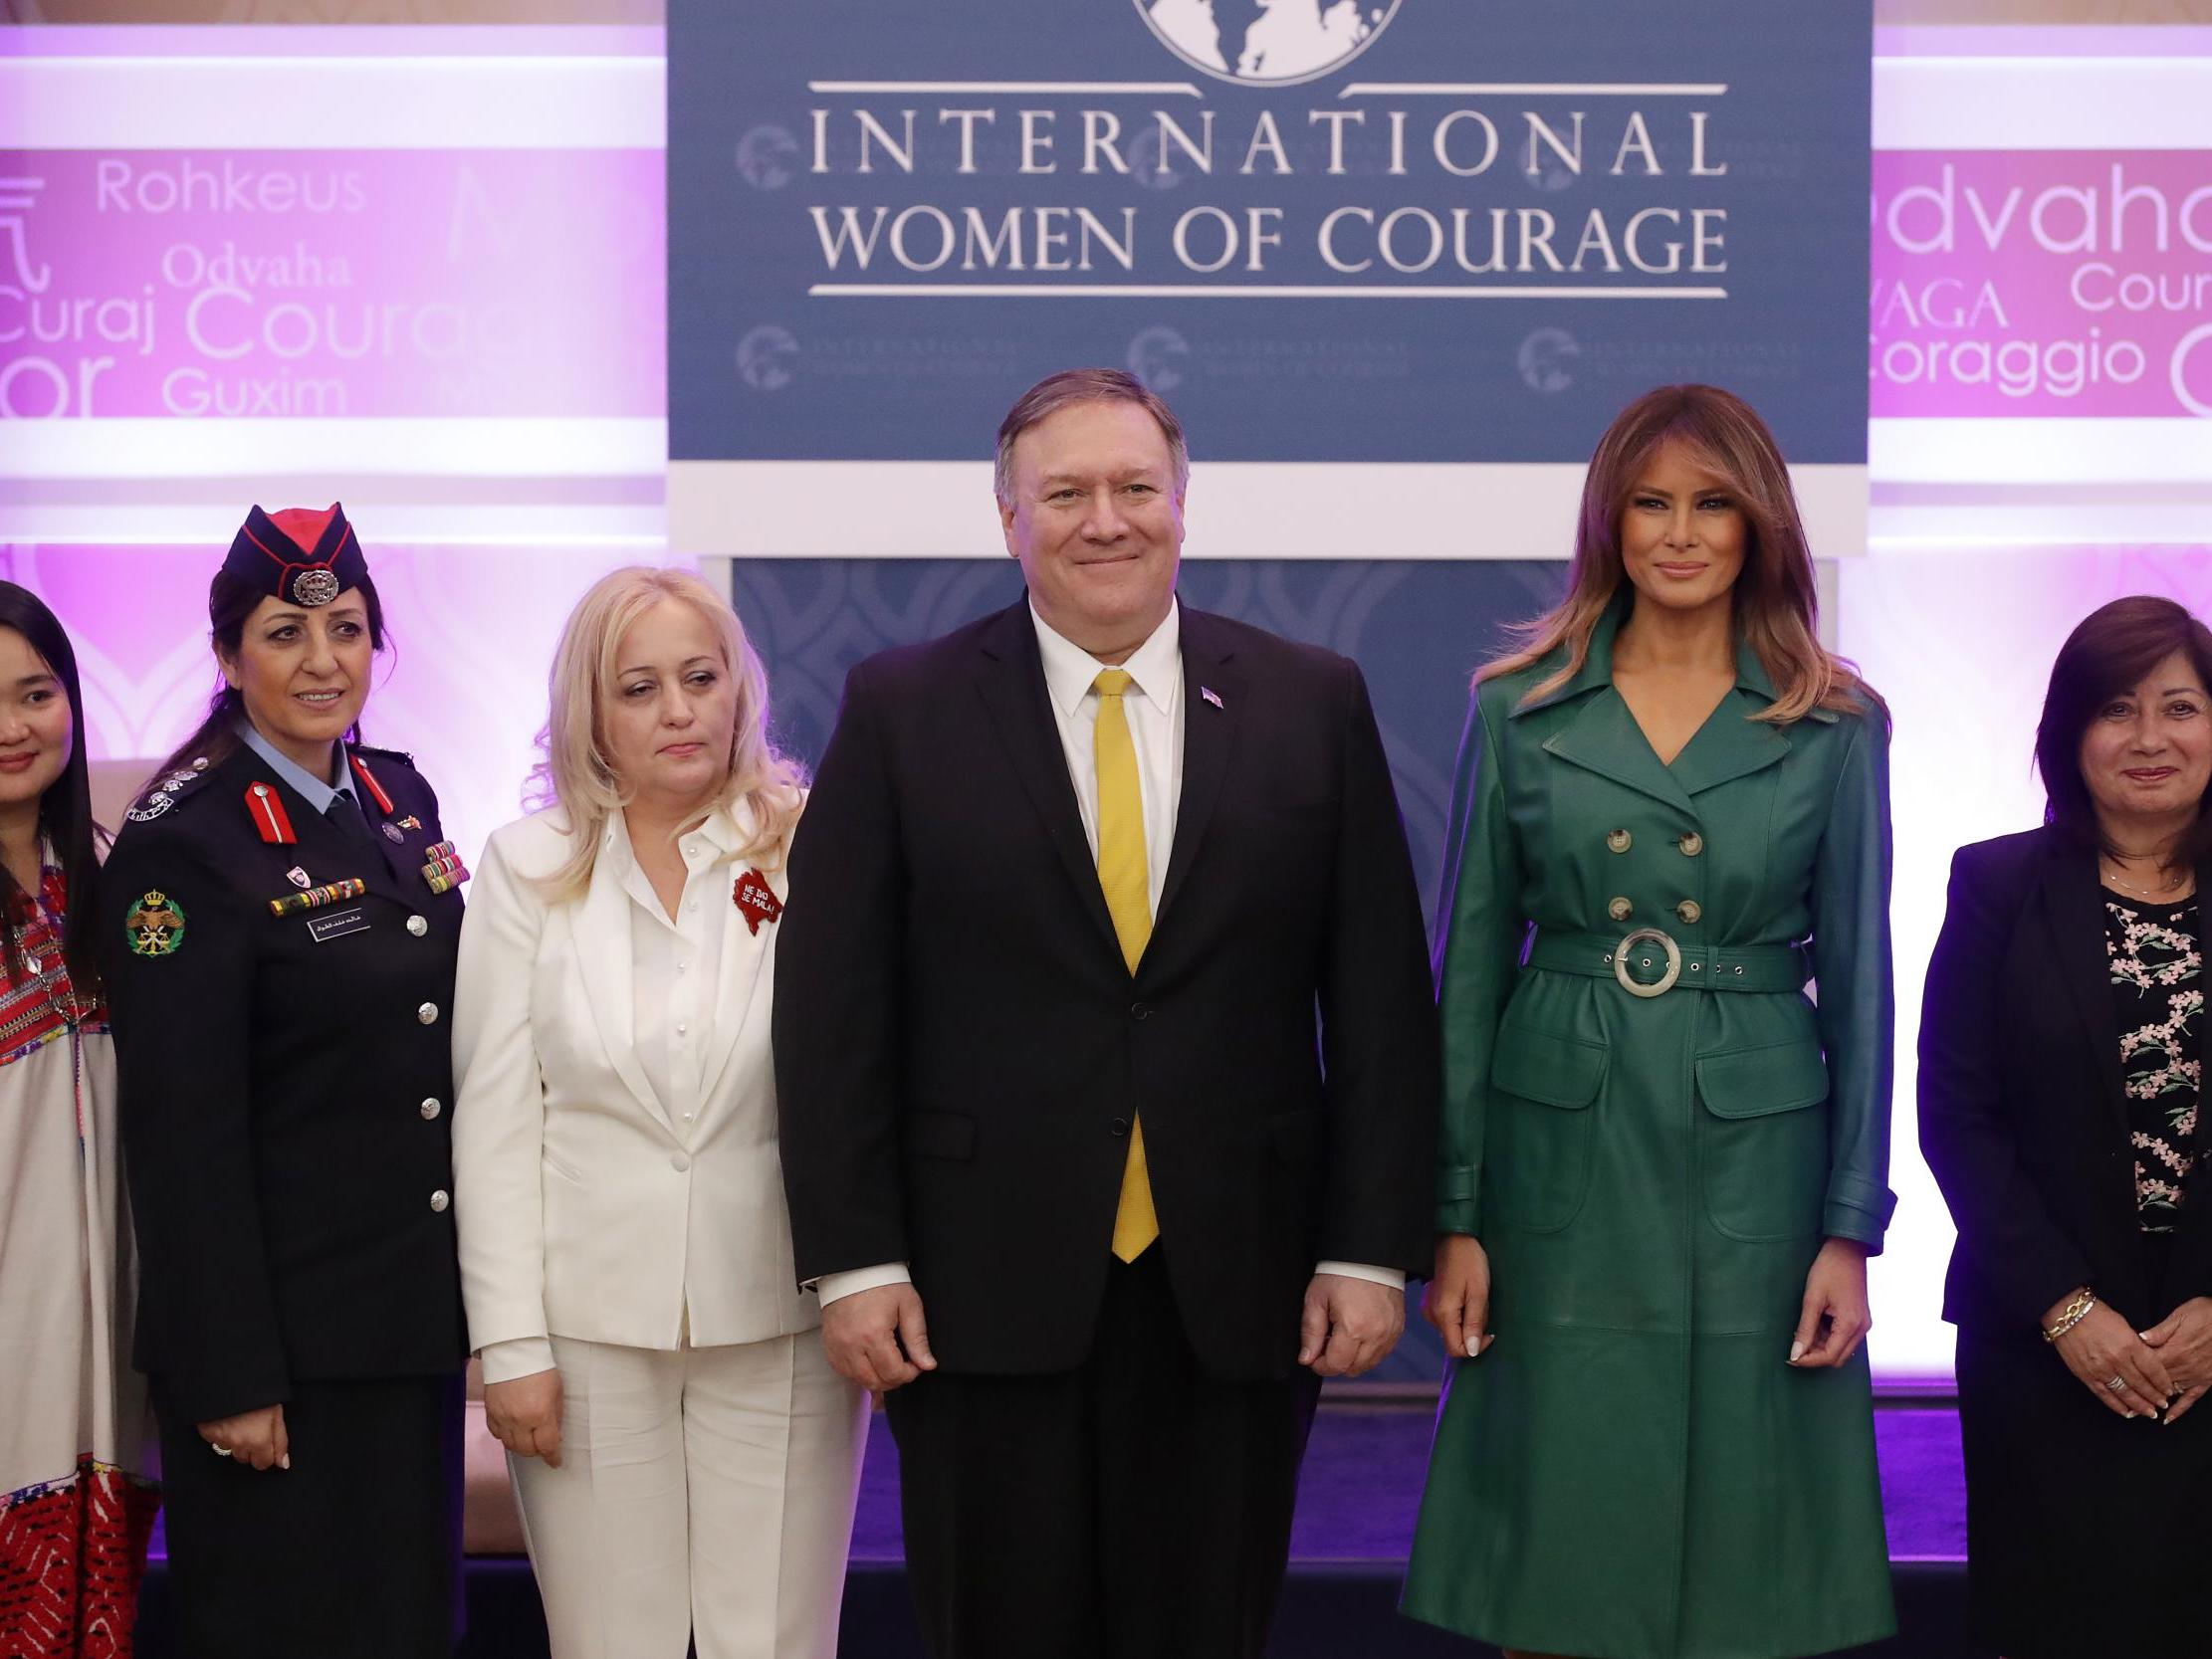 First lady Melania Trump and State Secretary Mike Pompeo pose alongside International Women of Courage awardees at the Department of State's Harry S. Truman building March 07, 2019.